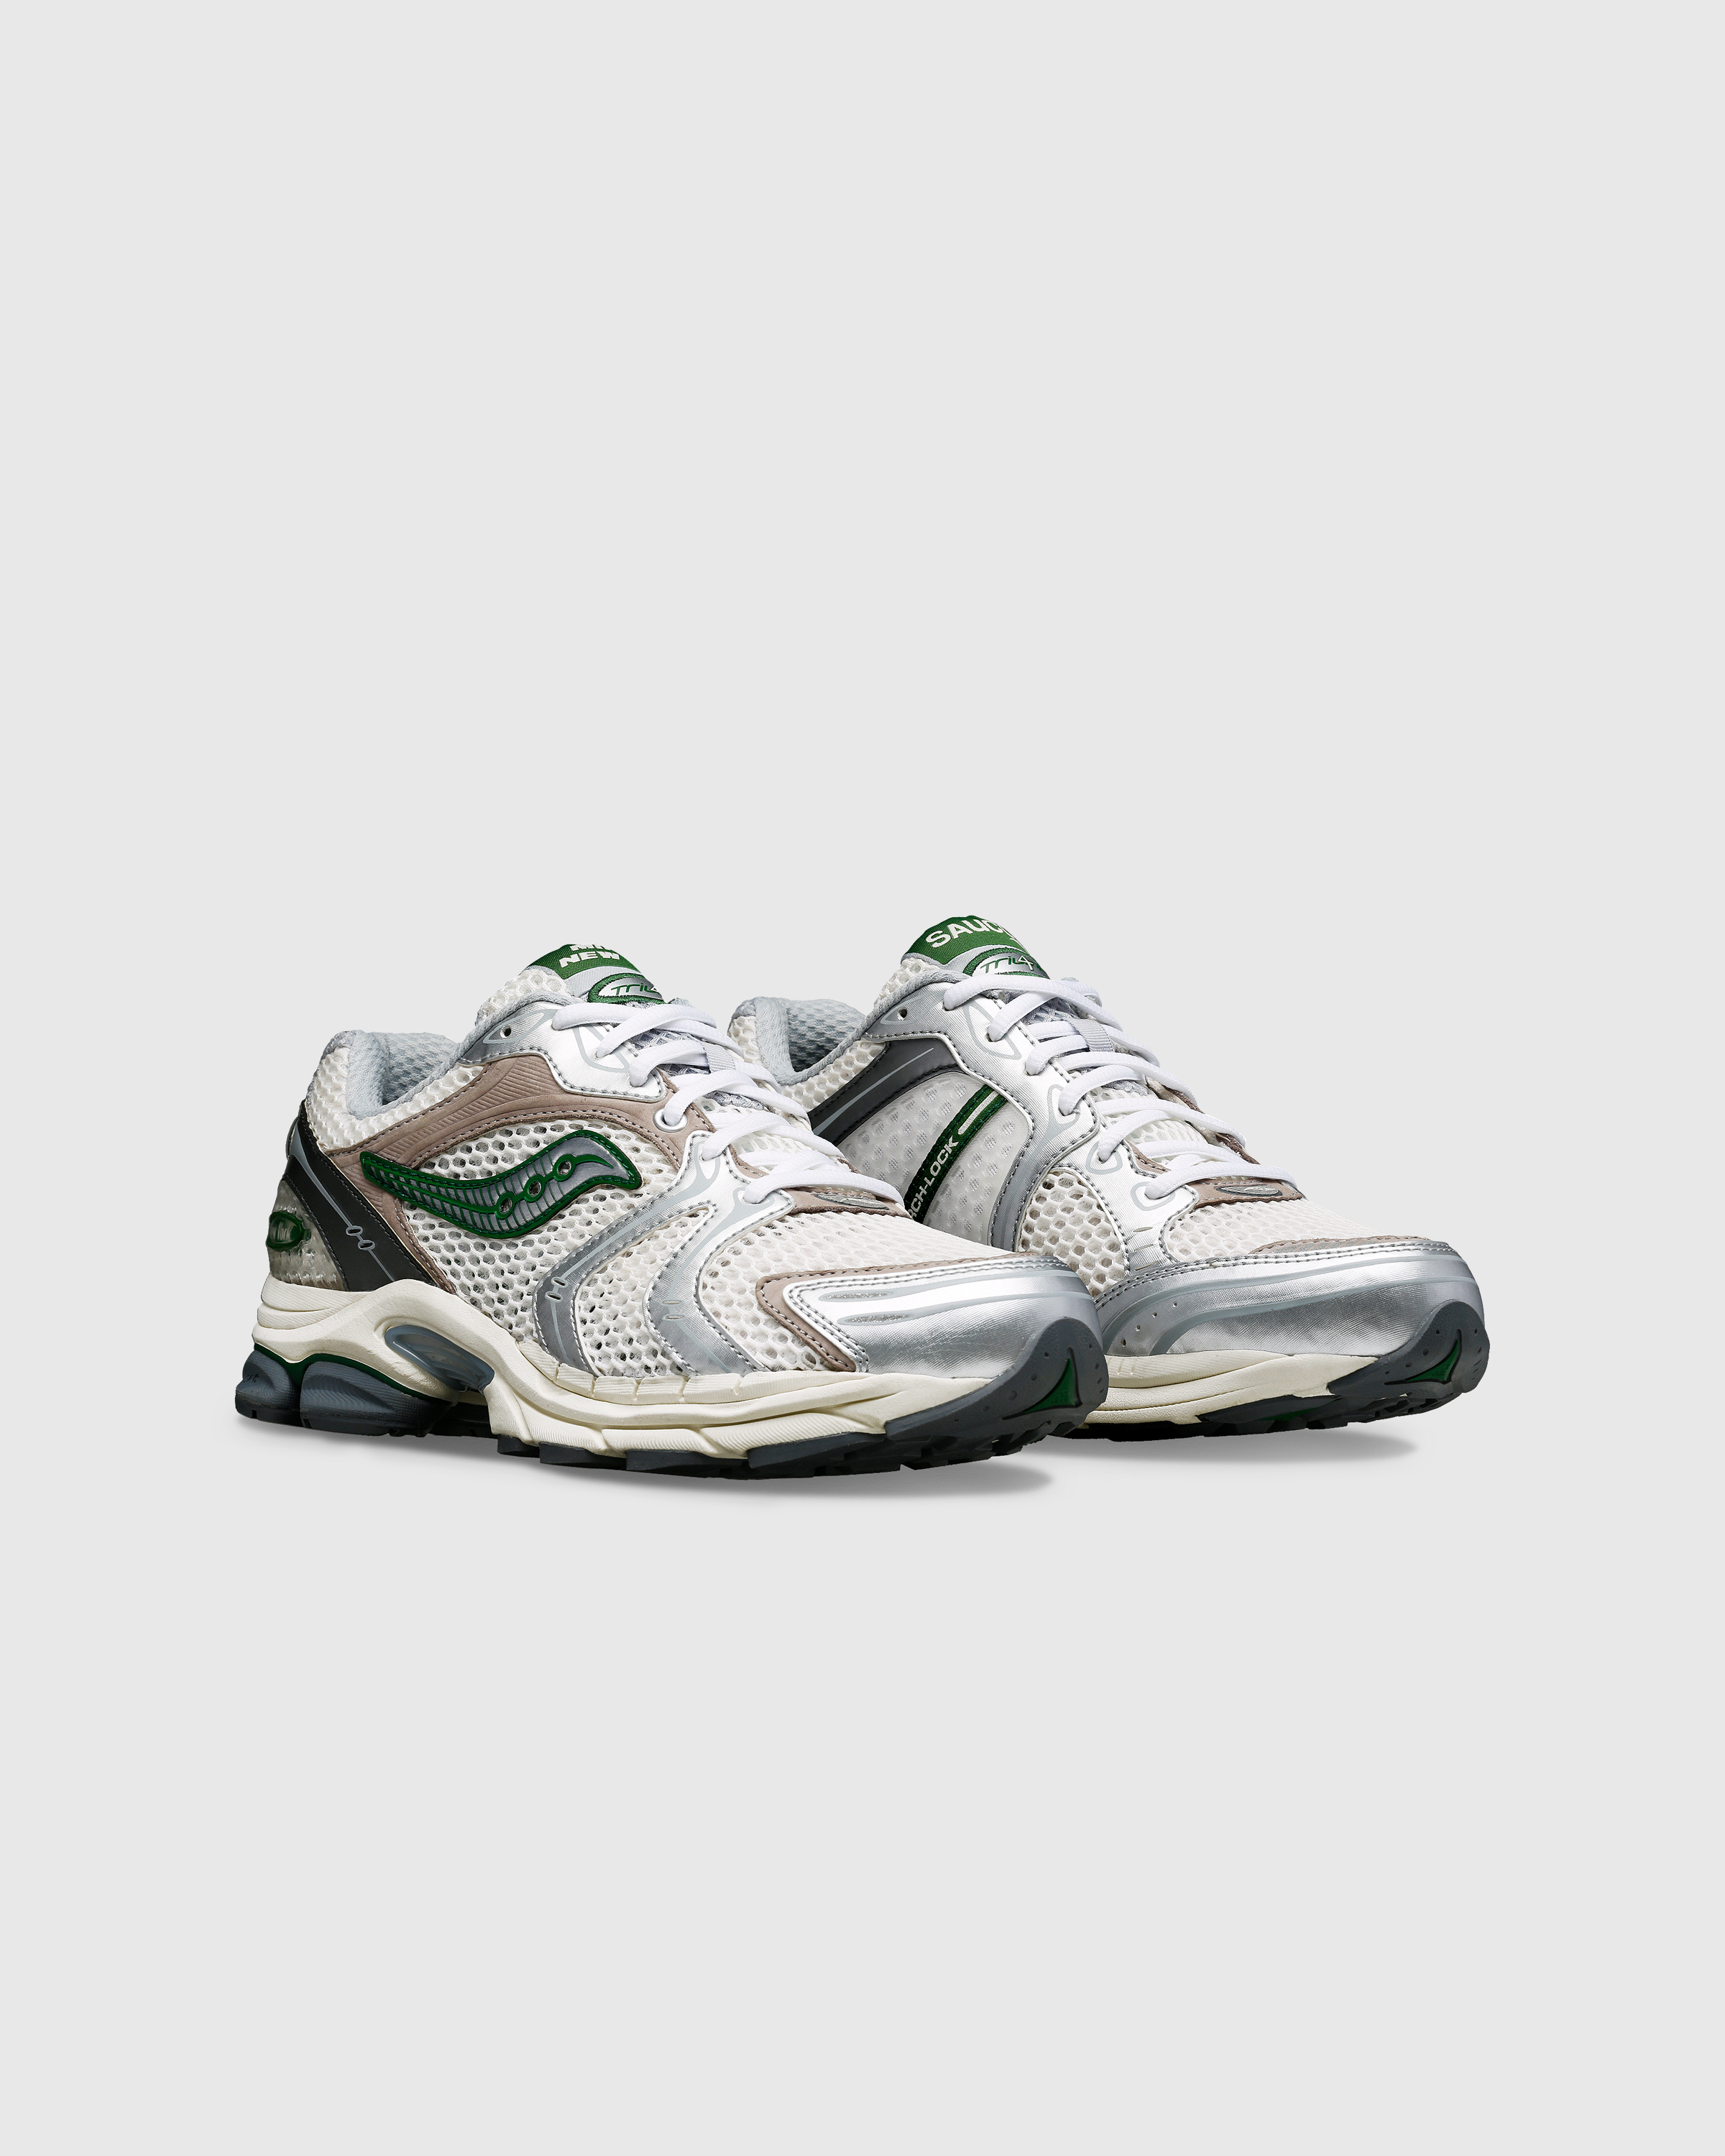 Saucony x Minted – ProGrid Triumph 4 Cream/Green - Low Top Sneakers - Beige - Image 3